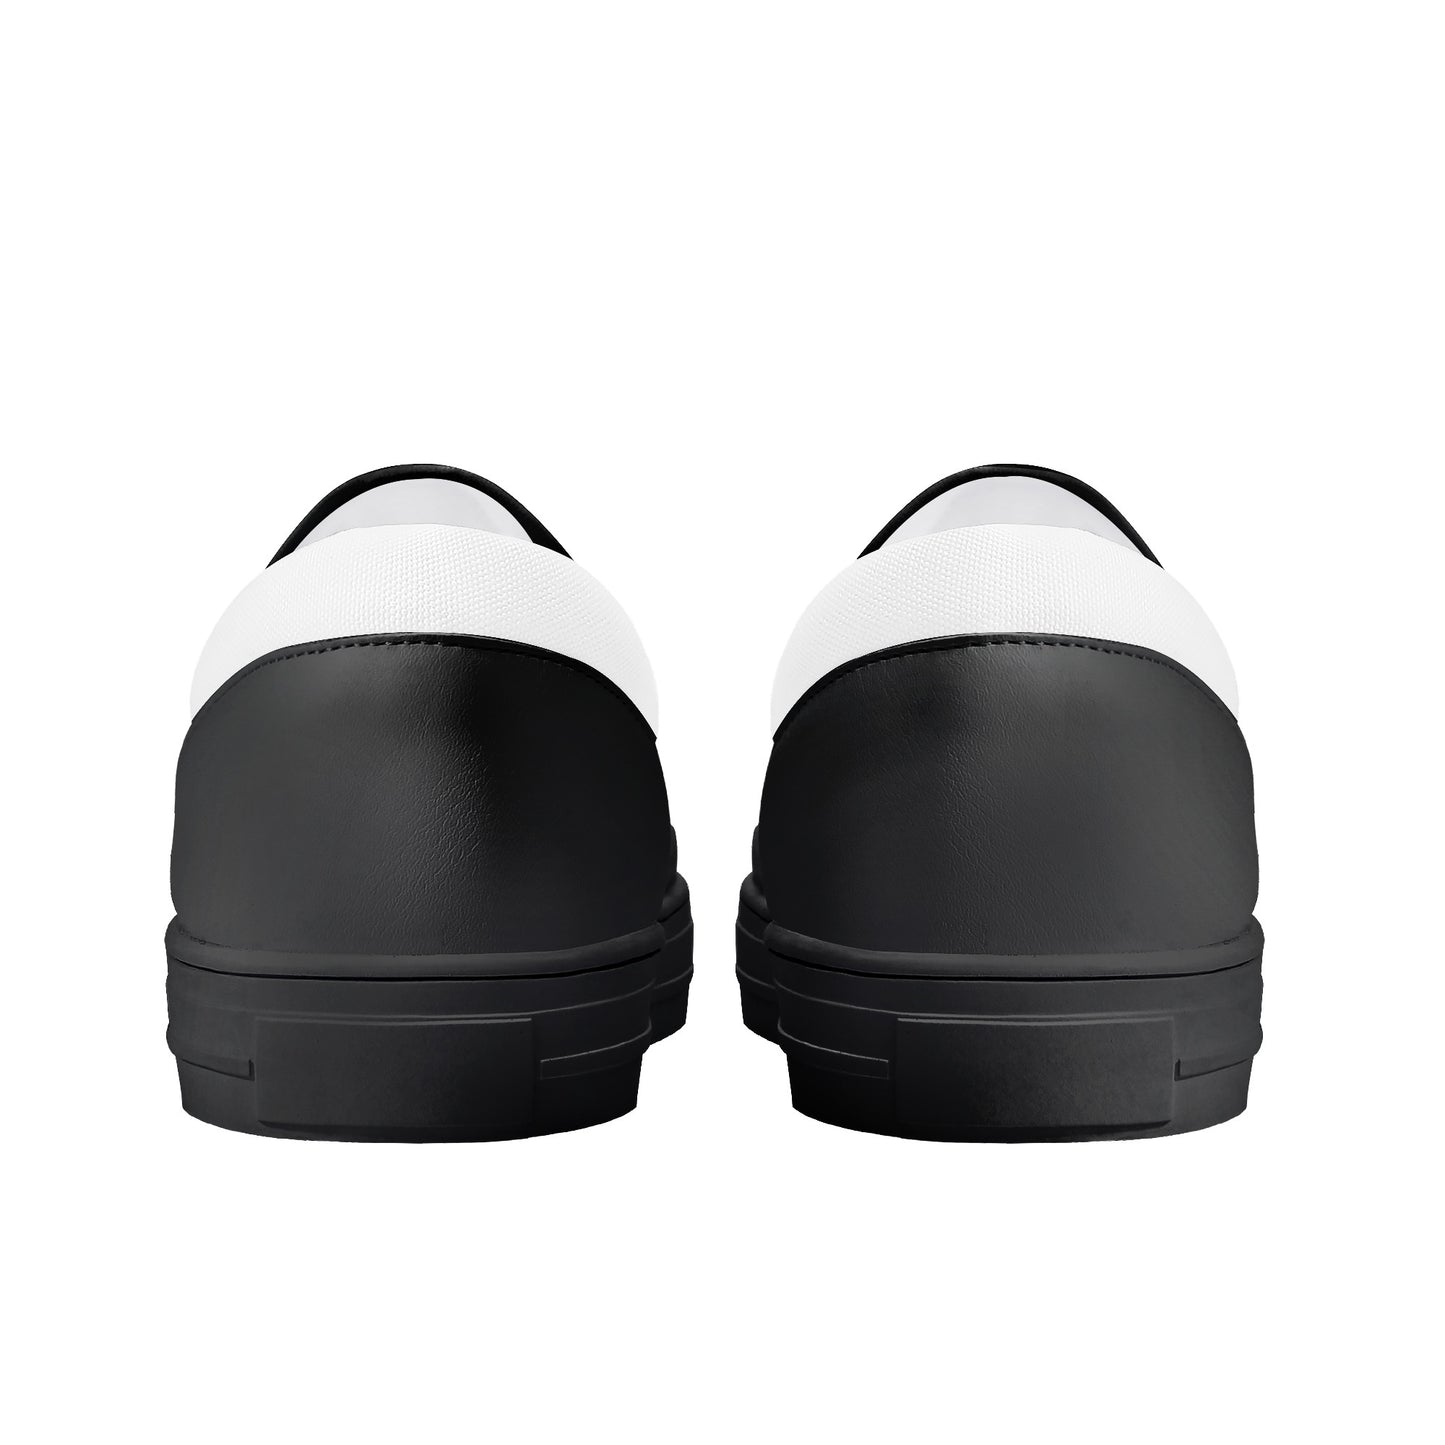 Create Your Own Kids Slip On Shoes - Black